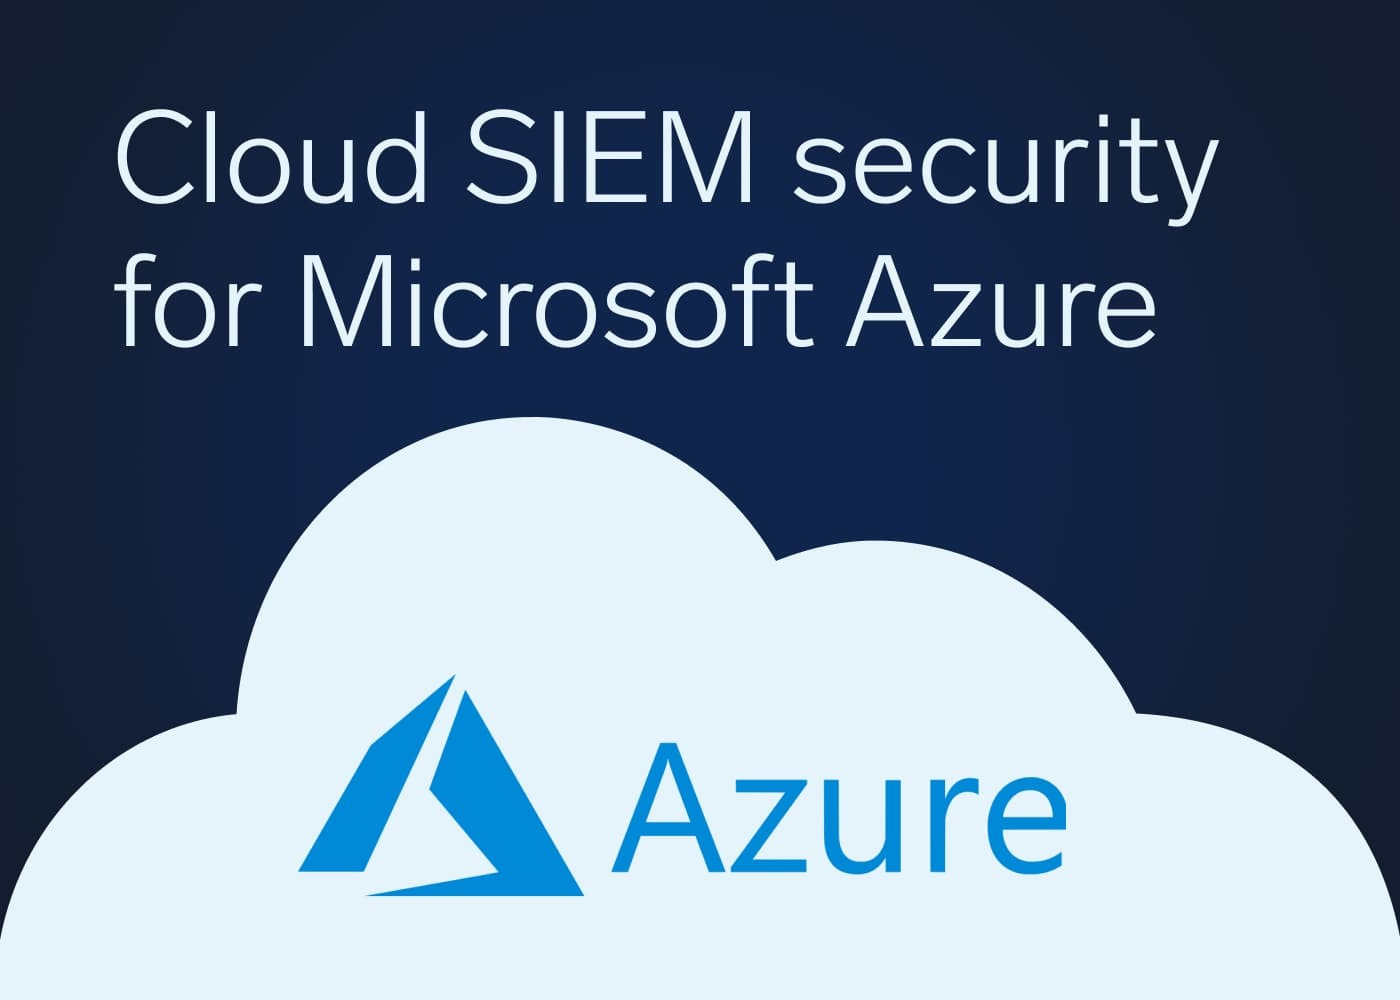 Sumo Logic expands Cloud SIEM security coverage for Microsoft Azure